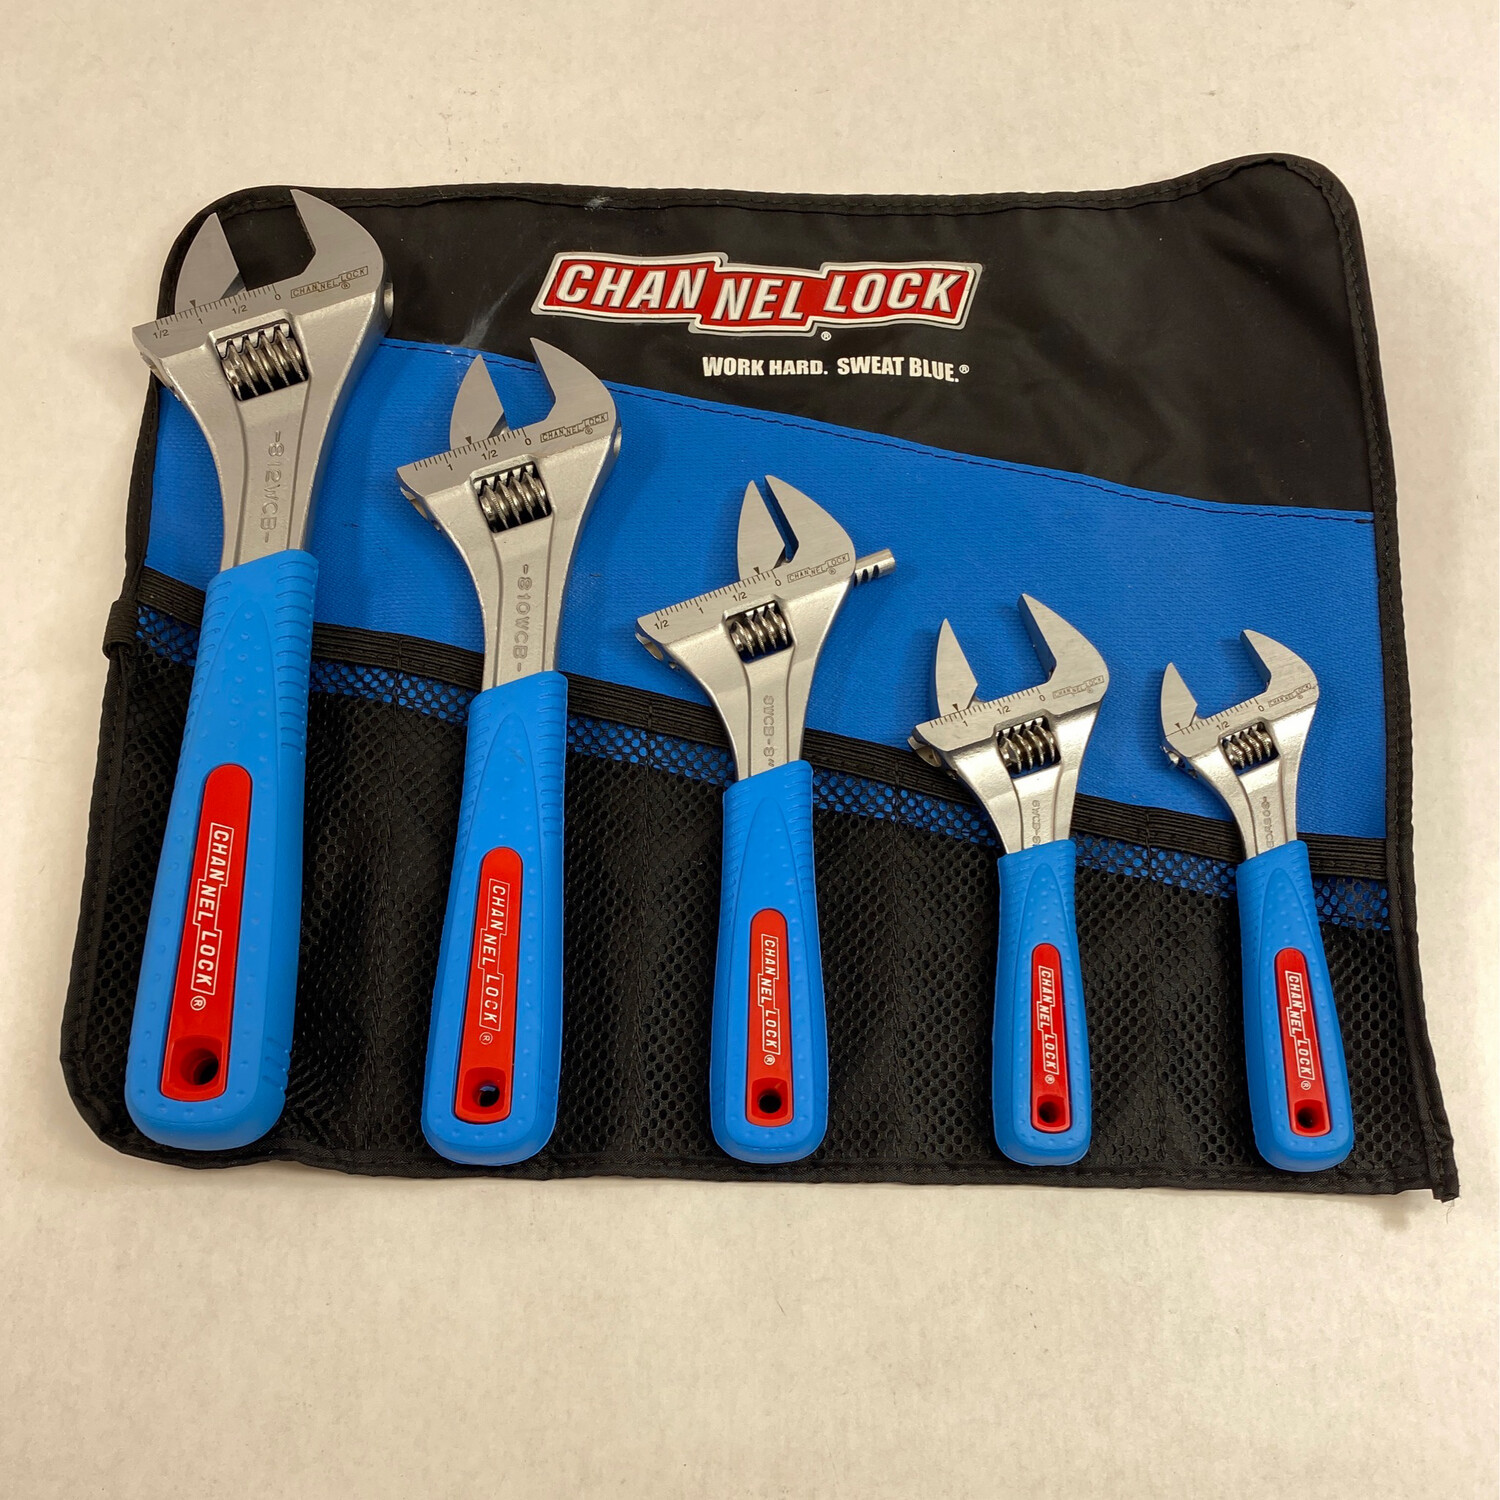 Channellock 5 Piece Code Blue Adjustable Wrench Set